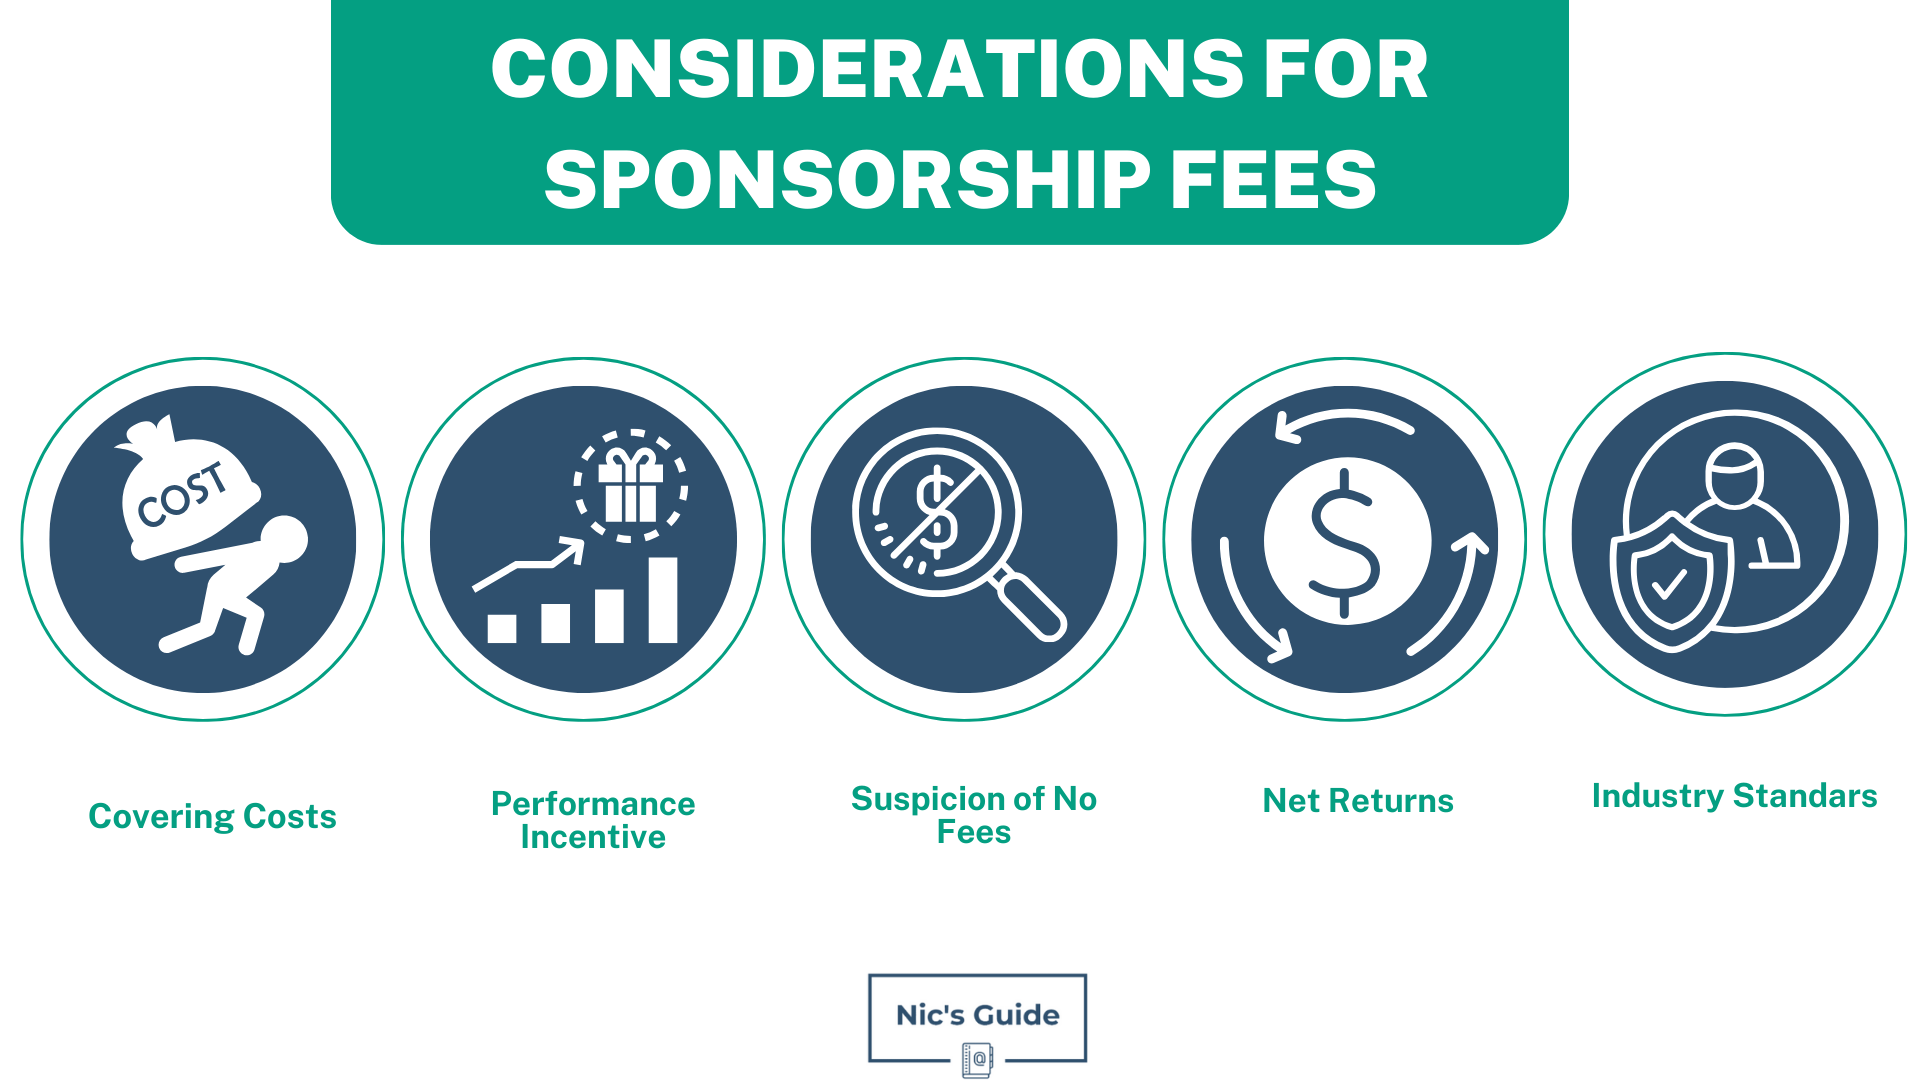 Considerations for sponsoship fees